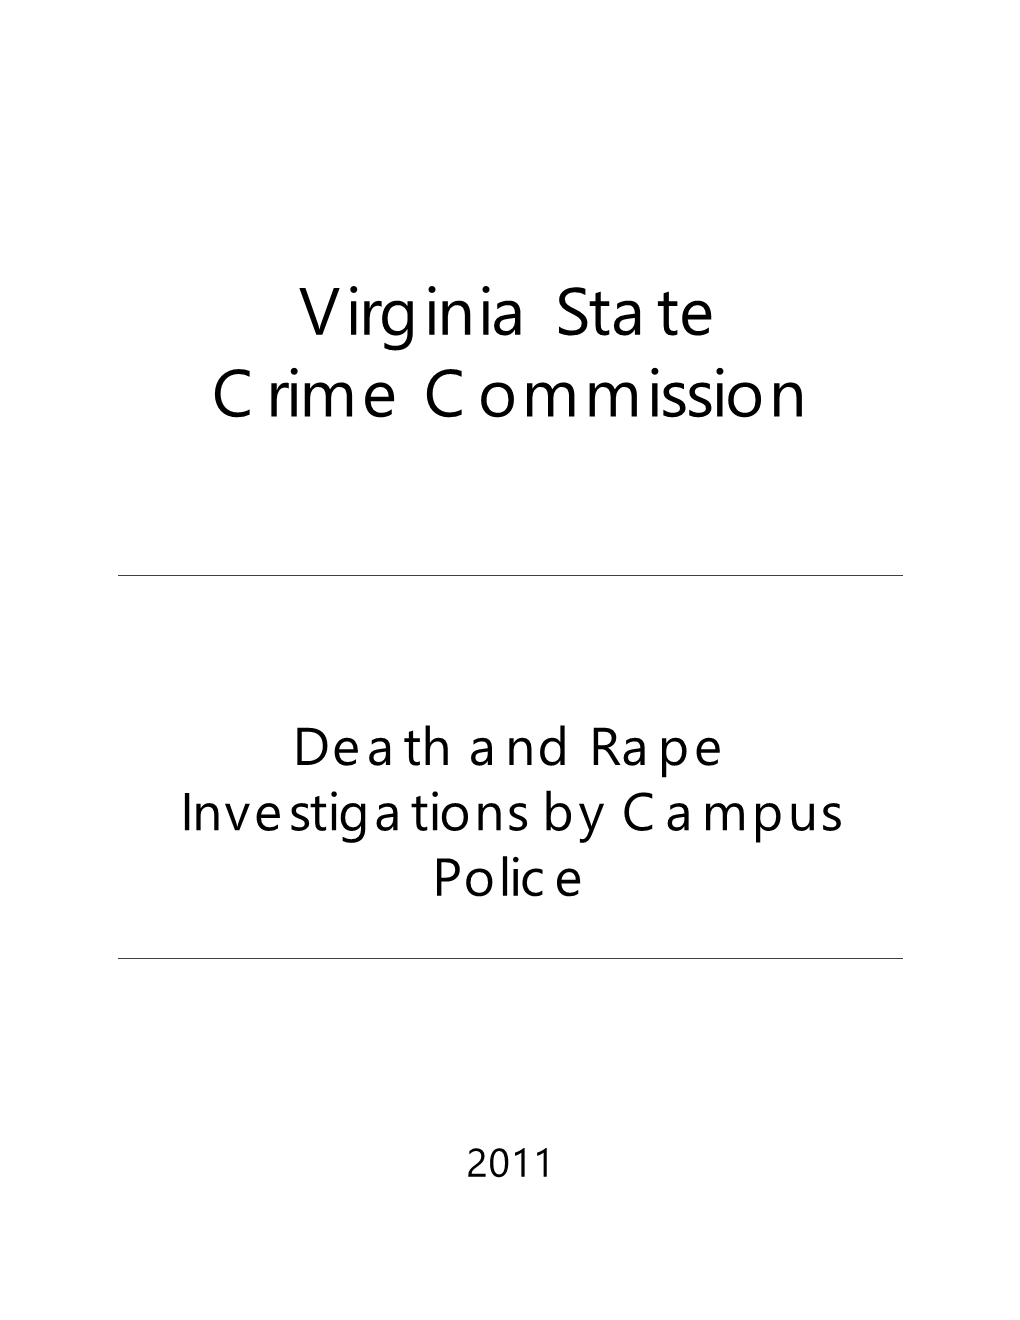 Death and Rape Investigations by Campus Police